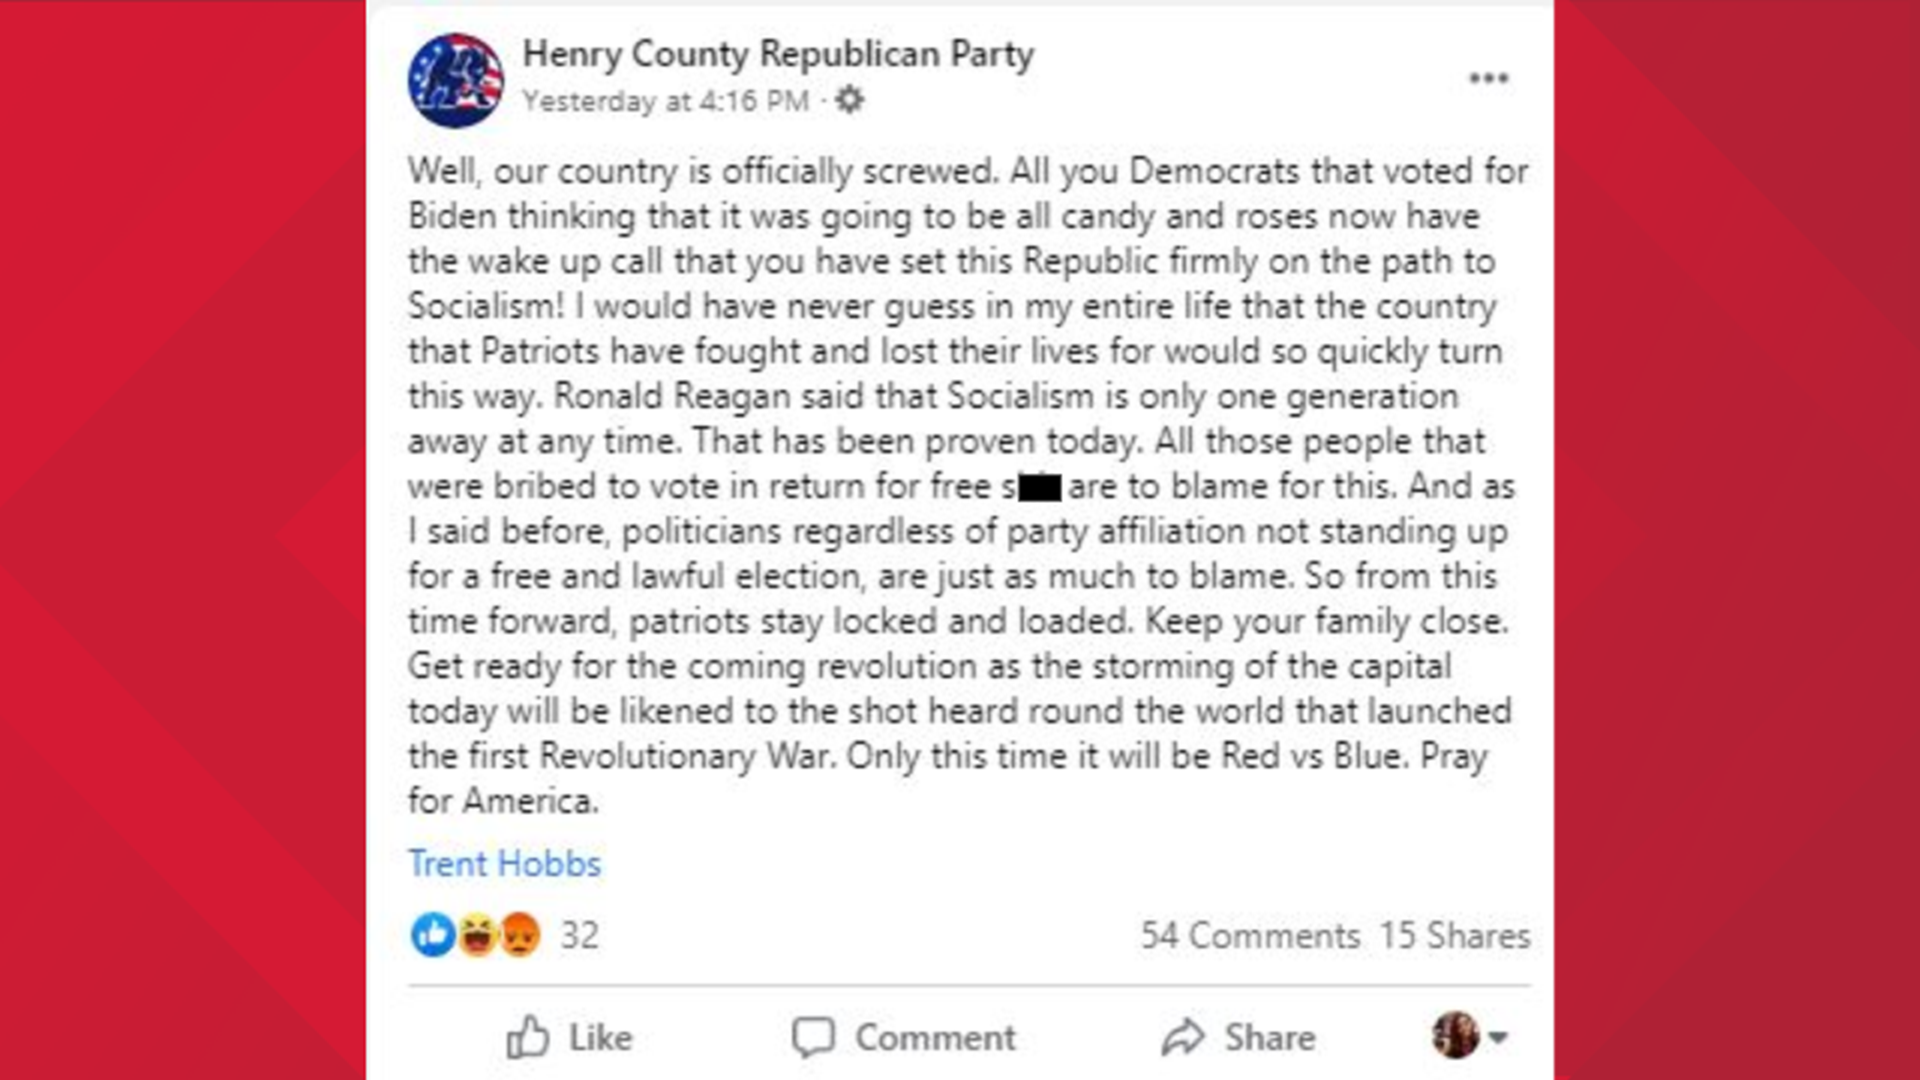 The alarming post from the Henry County Republican Party says, "So from this time forward, patriots stay locked and loaded. Keep your family close."